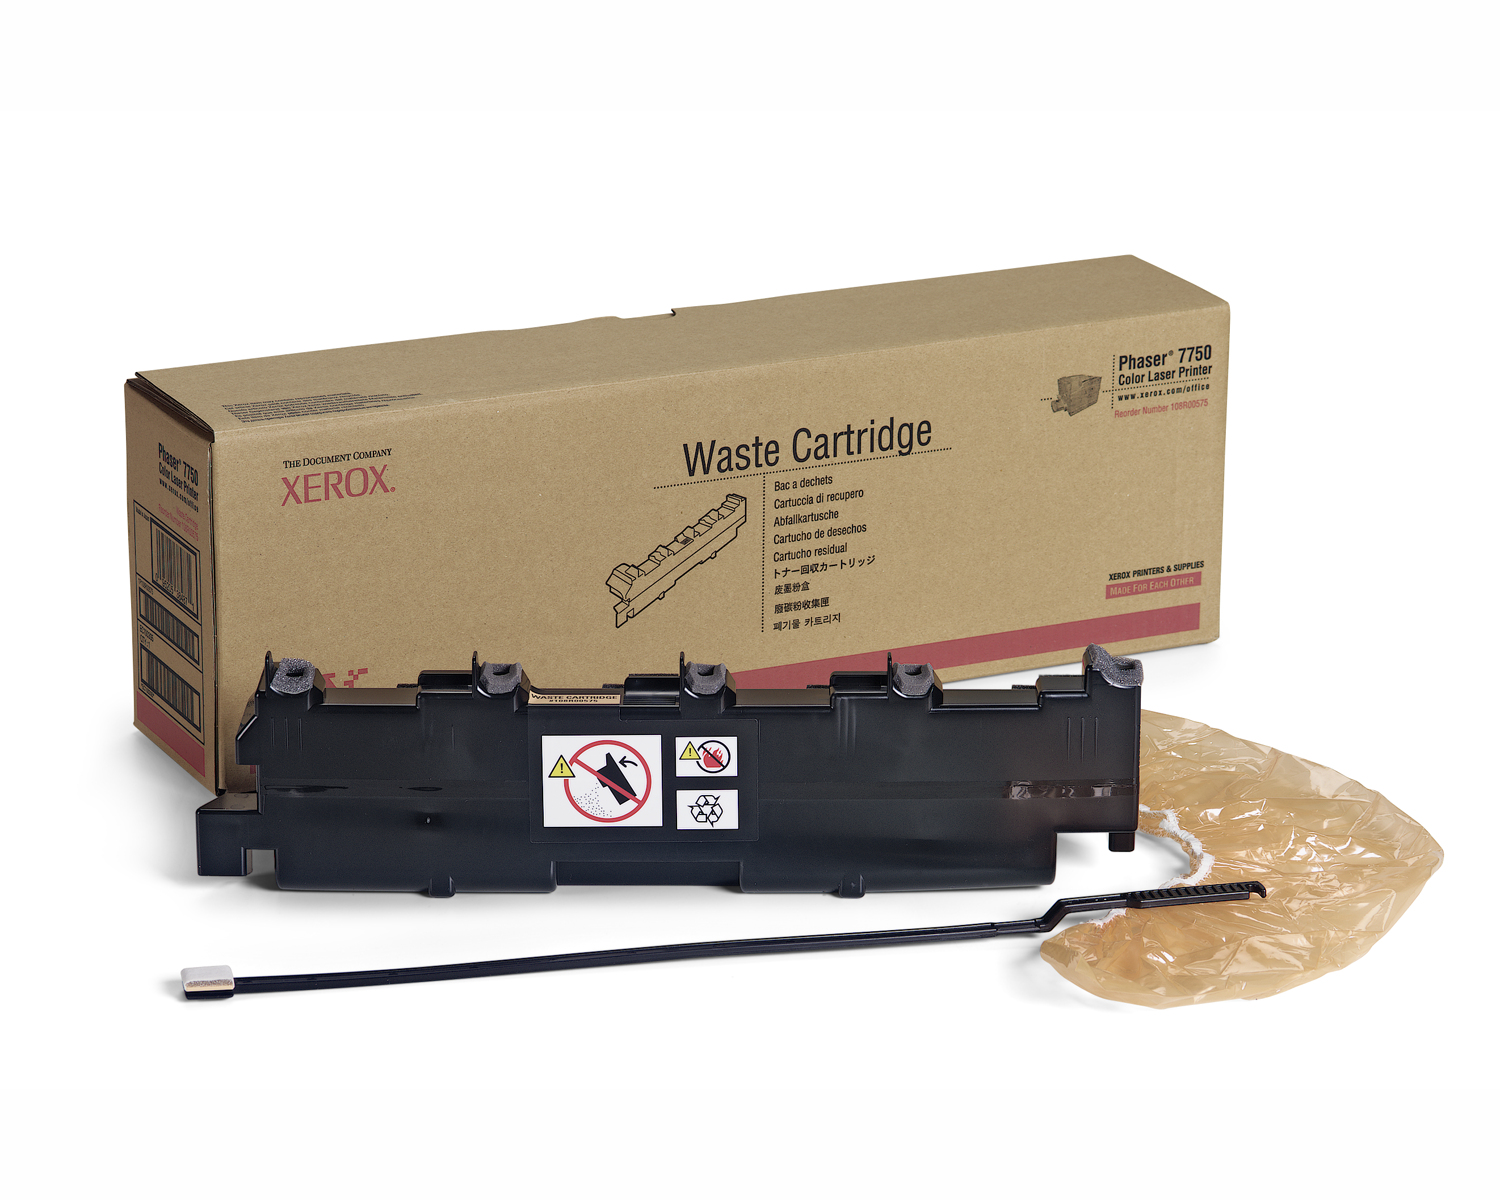 Xerox Waste Cartridge (Up to 27000 pages)